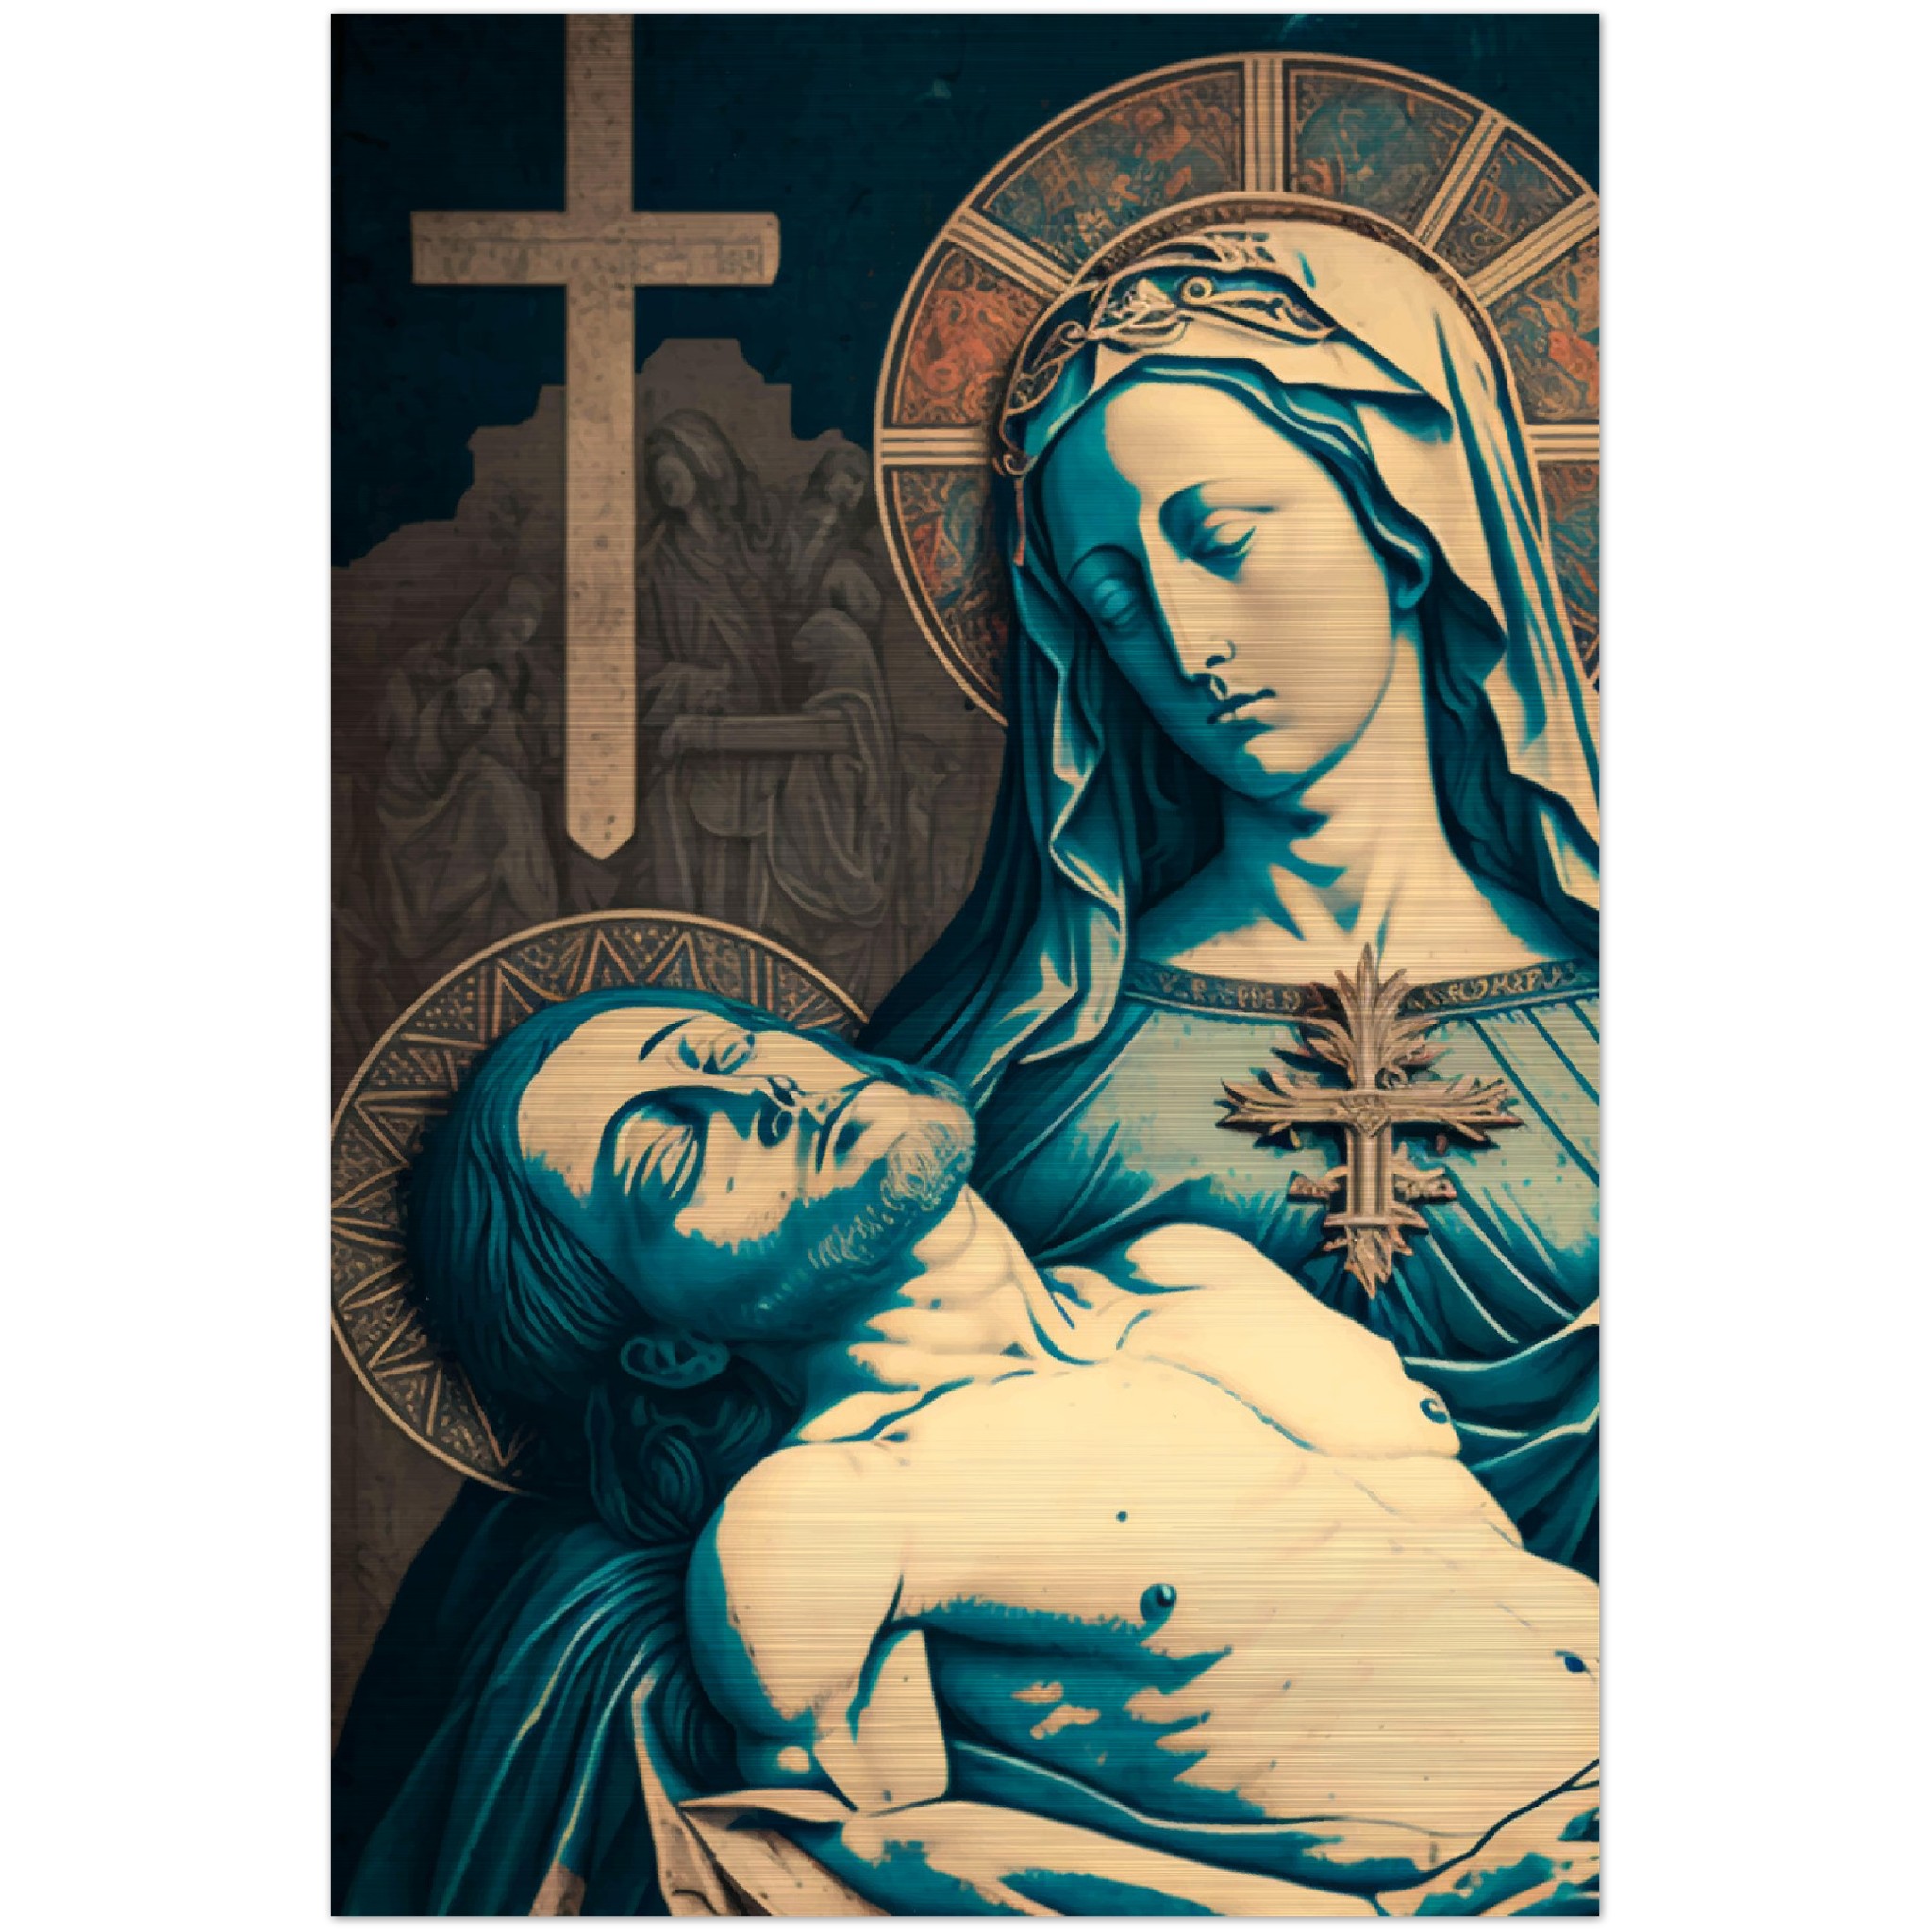 Pietà - Passion of Christ, strengthen me ✠ Brushed Aluminum Icon